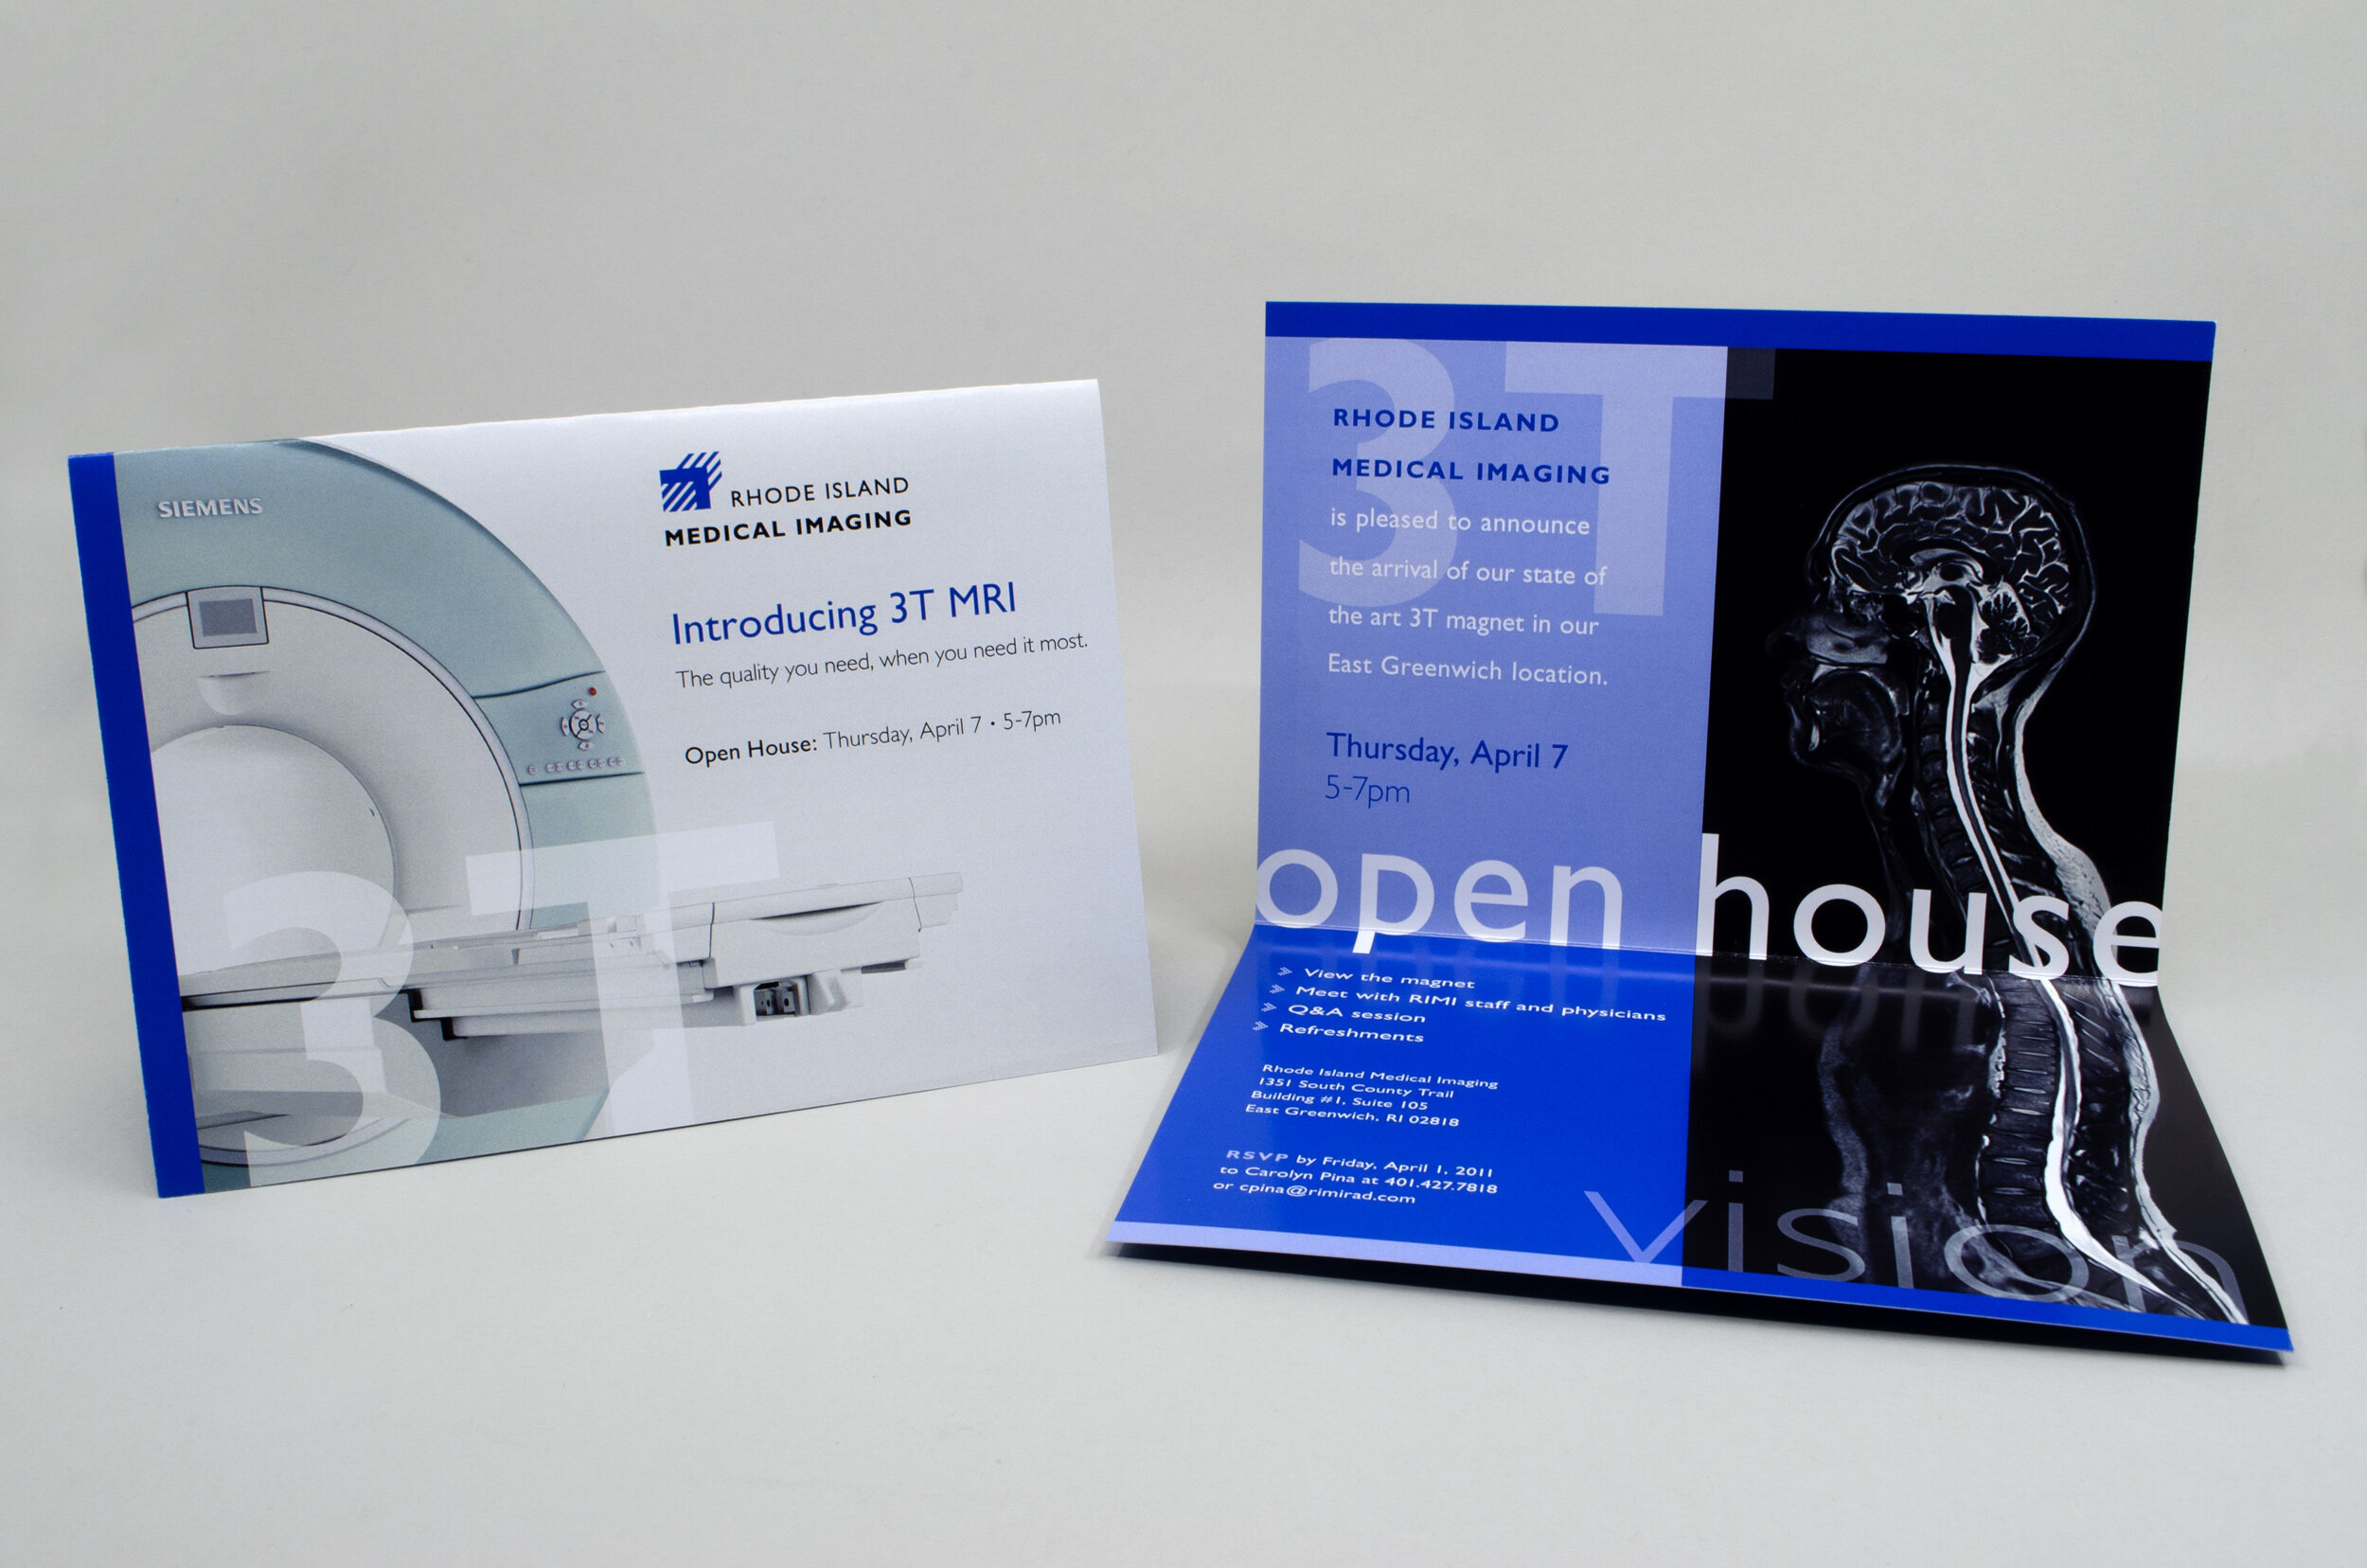   Rhode Island Medical Imaging Announcement Card  • designer: Michael Balint • assistant designer: Dawn Vietro • copy/direction: Acadia Consulting Group 